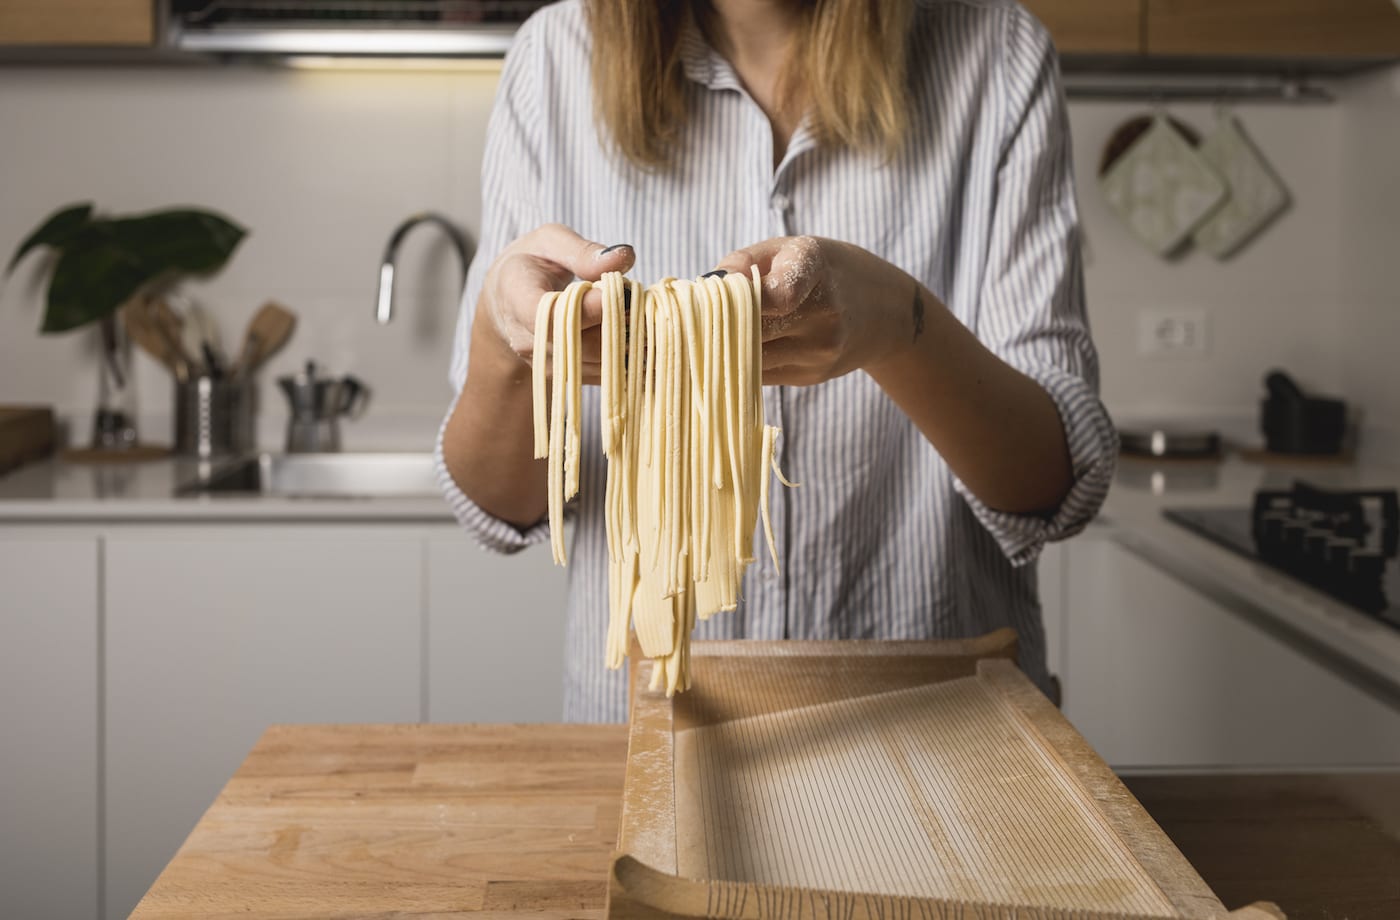 5 healthy homemade pasta recipes that taste so good, you'll want to ditch the boxed stuff